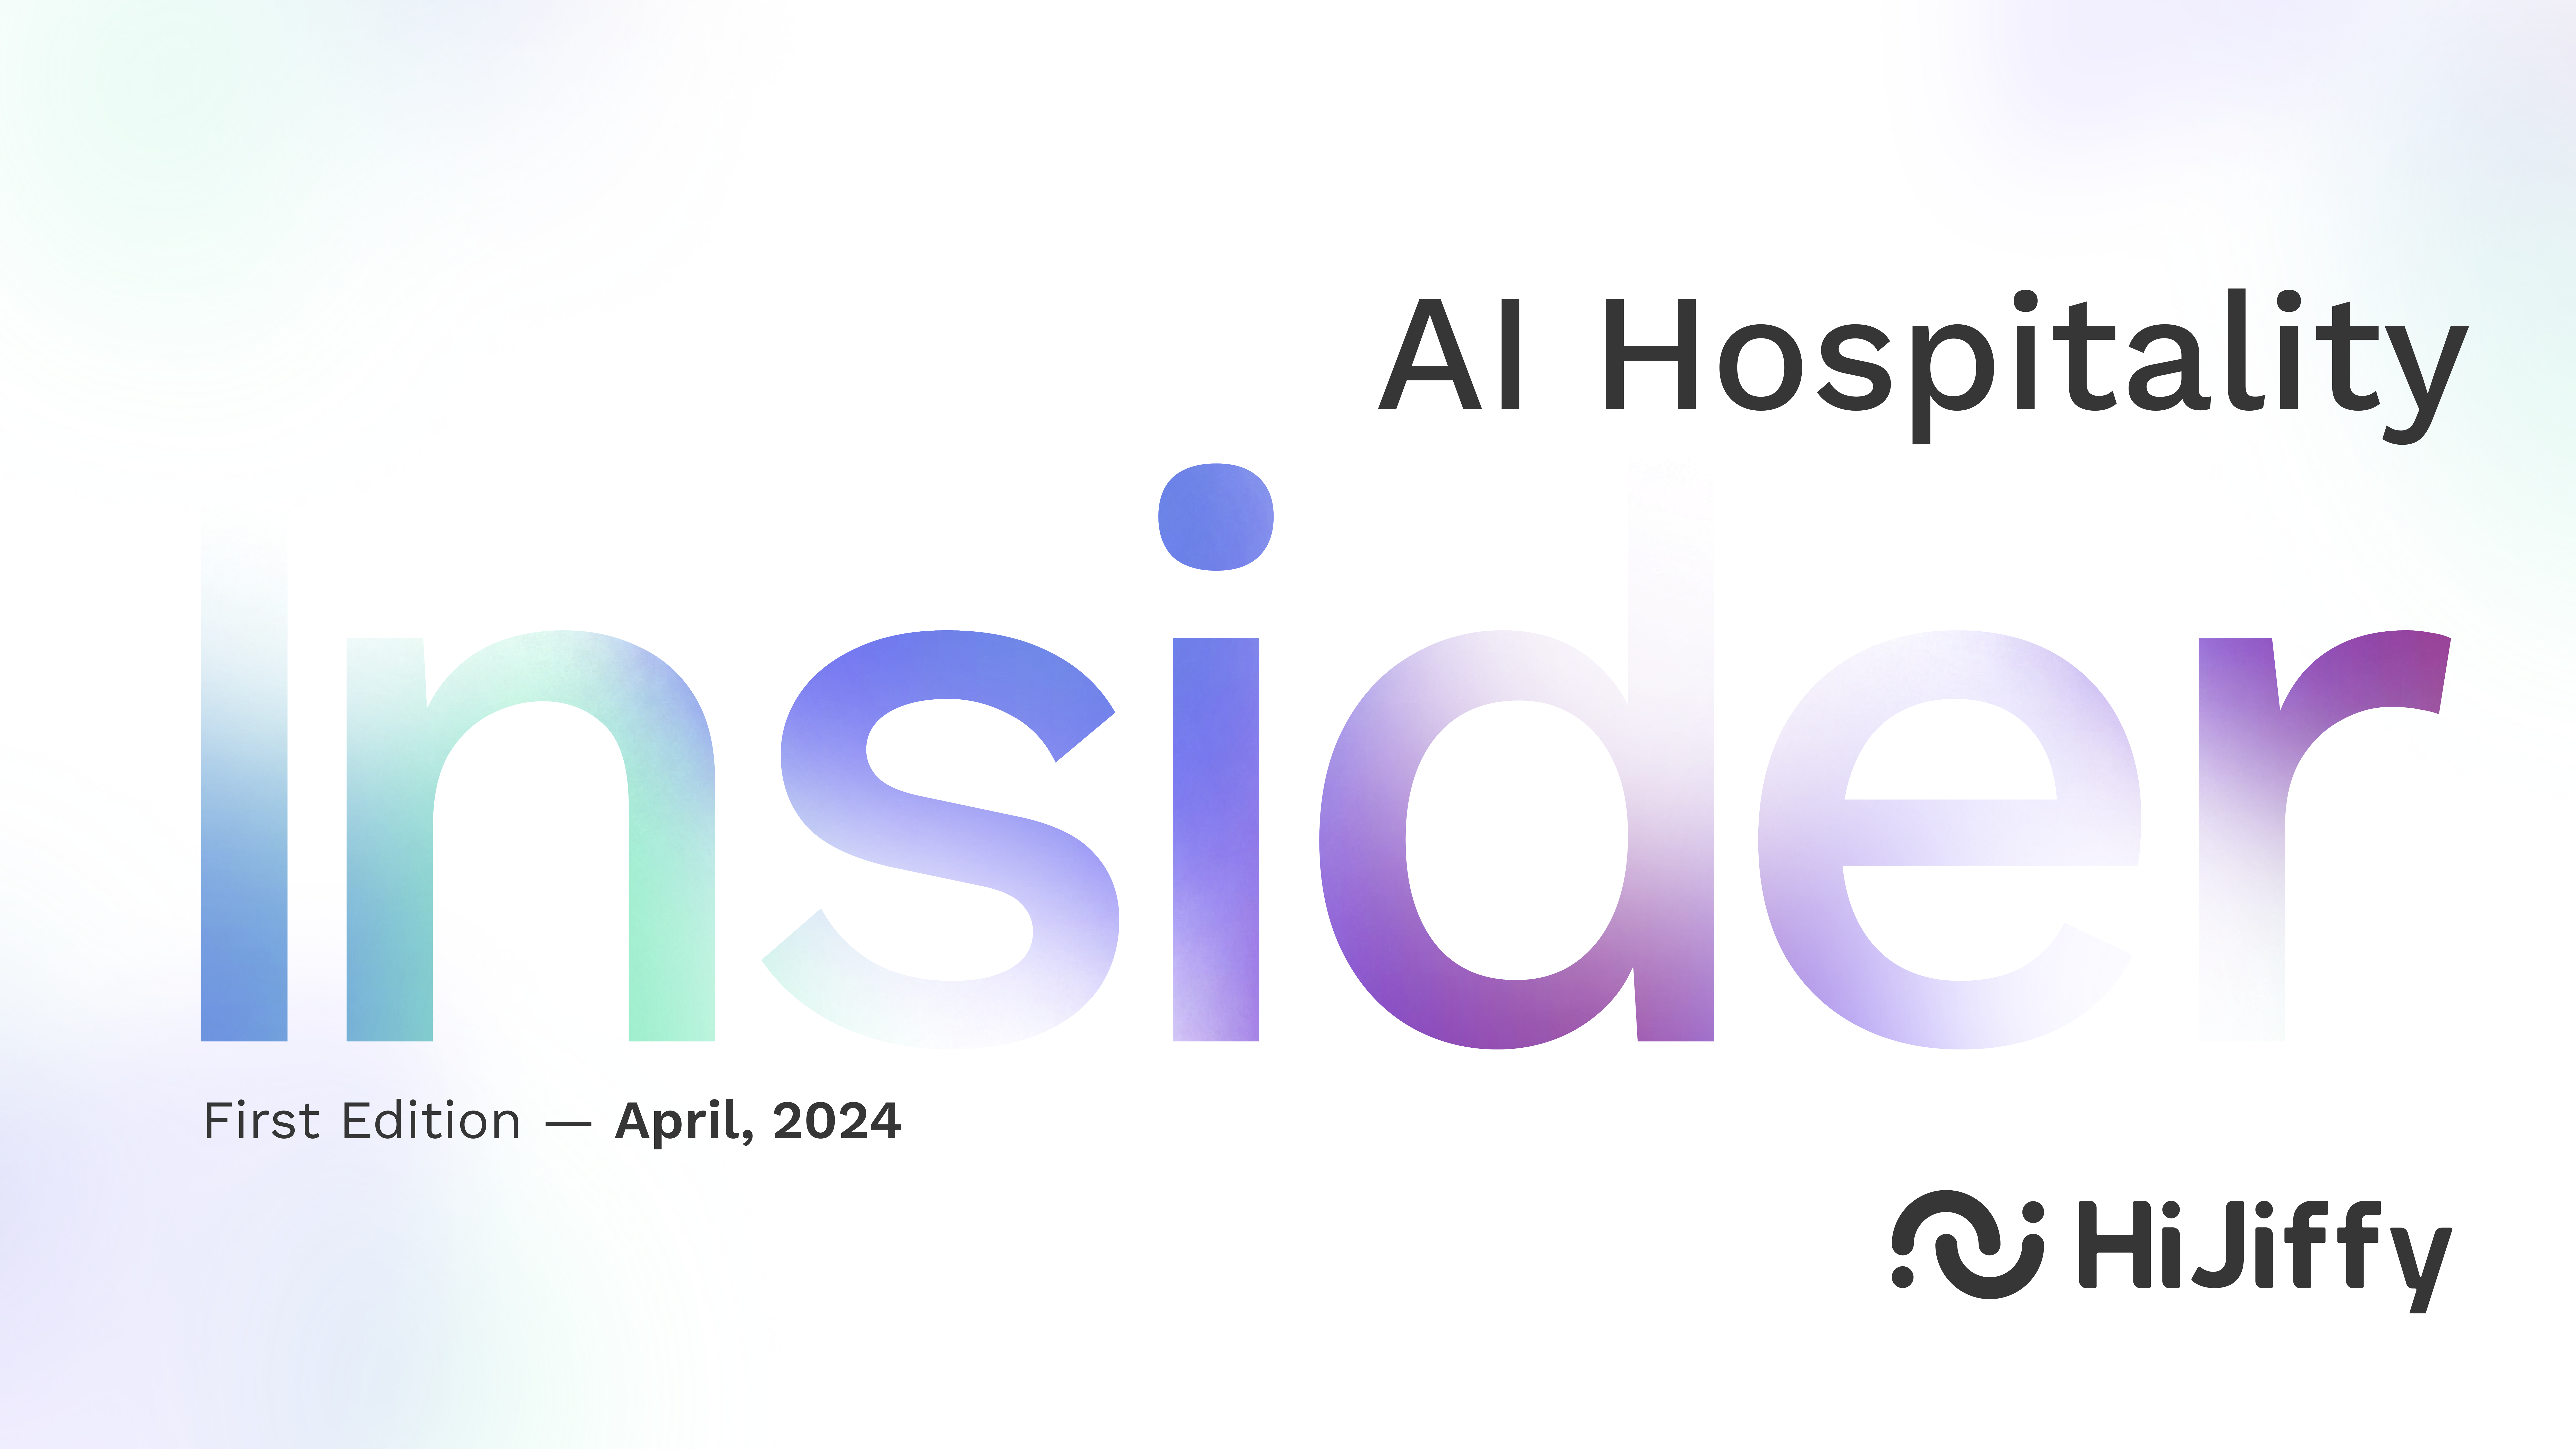 AI Hospitality Insider - The first edition of our magazine for the hotel industry is available!